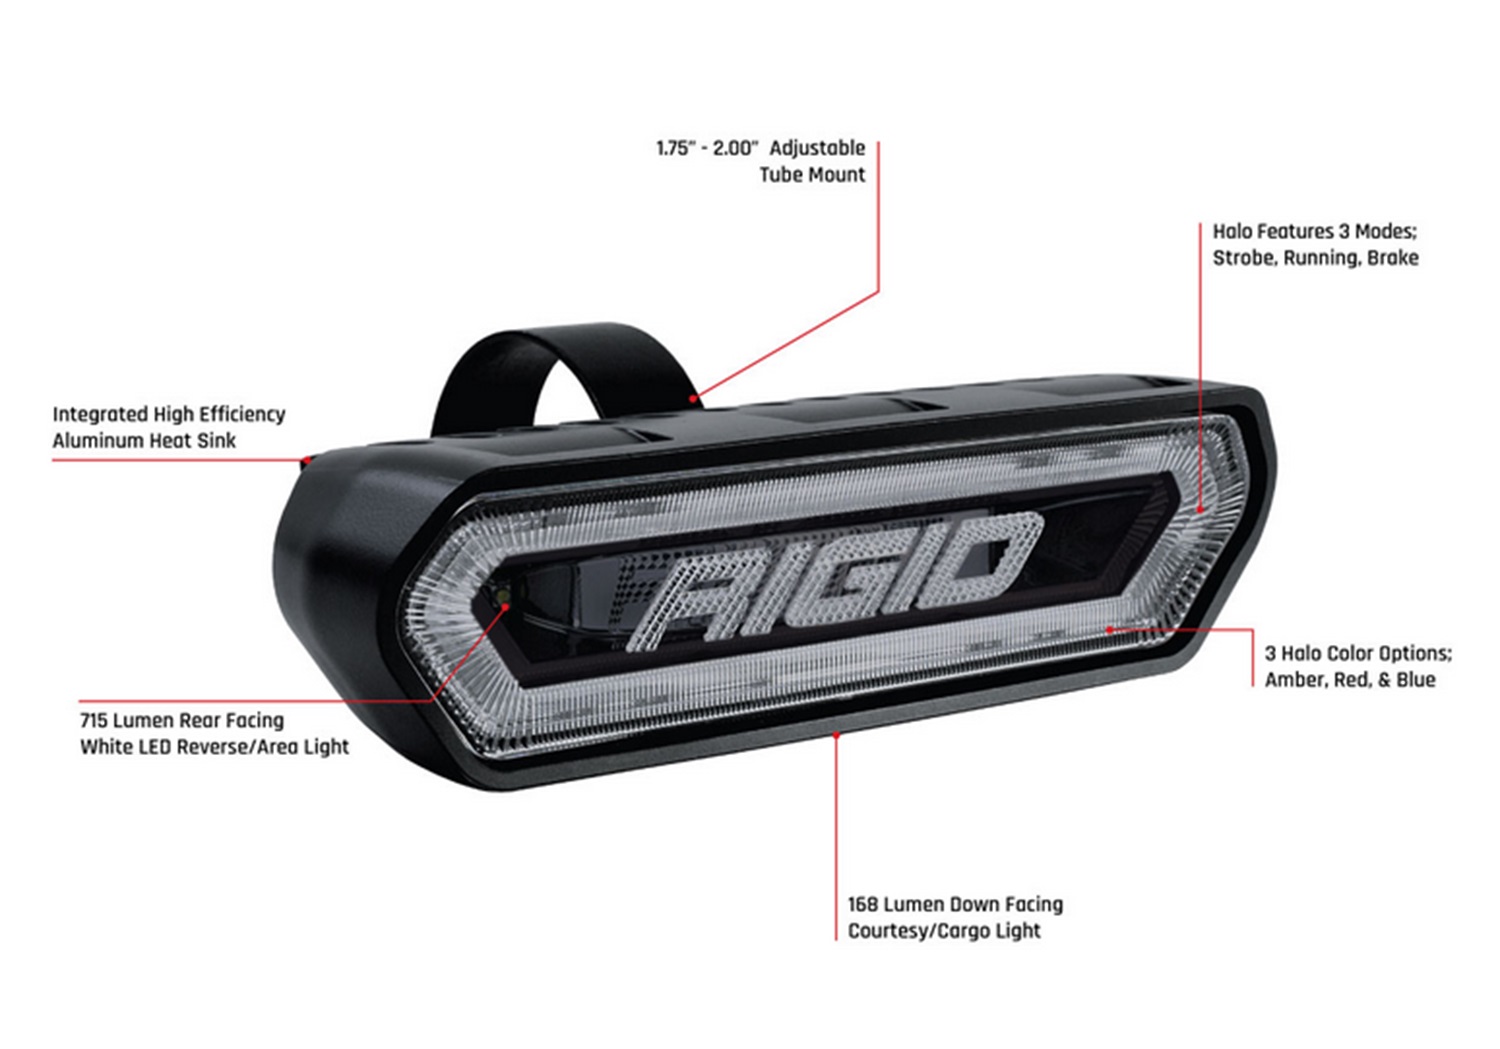 Picture of RIGID Industries 90133 Rigid Chase, Rear Facing 5 Mode Led Light, Red Halo, Black Housing